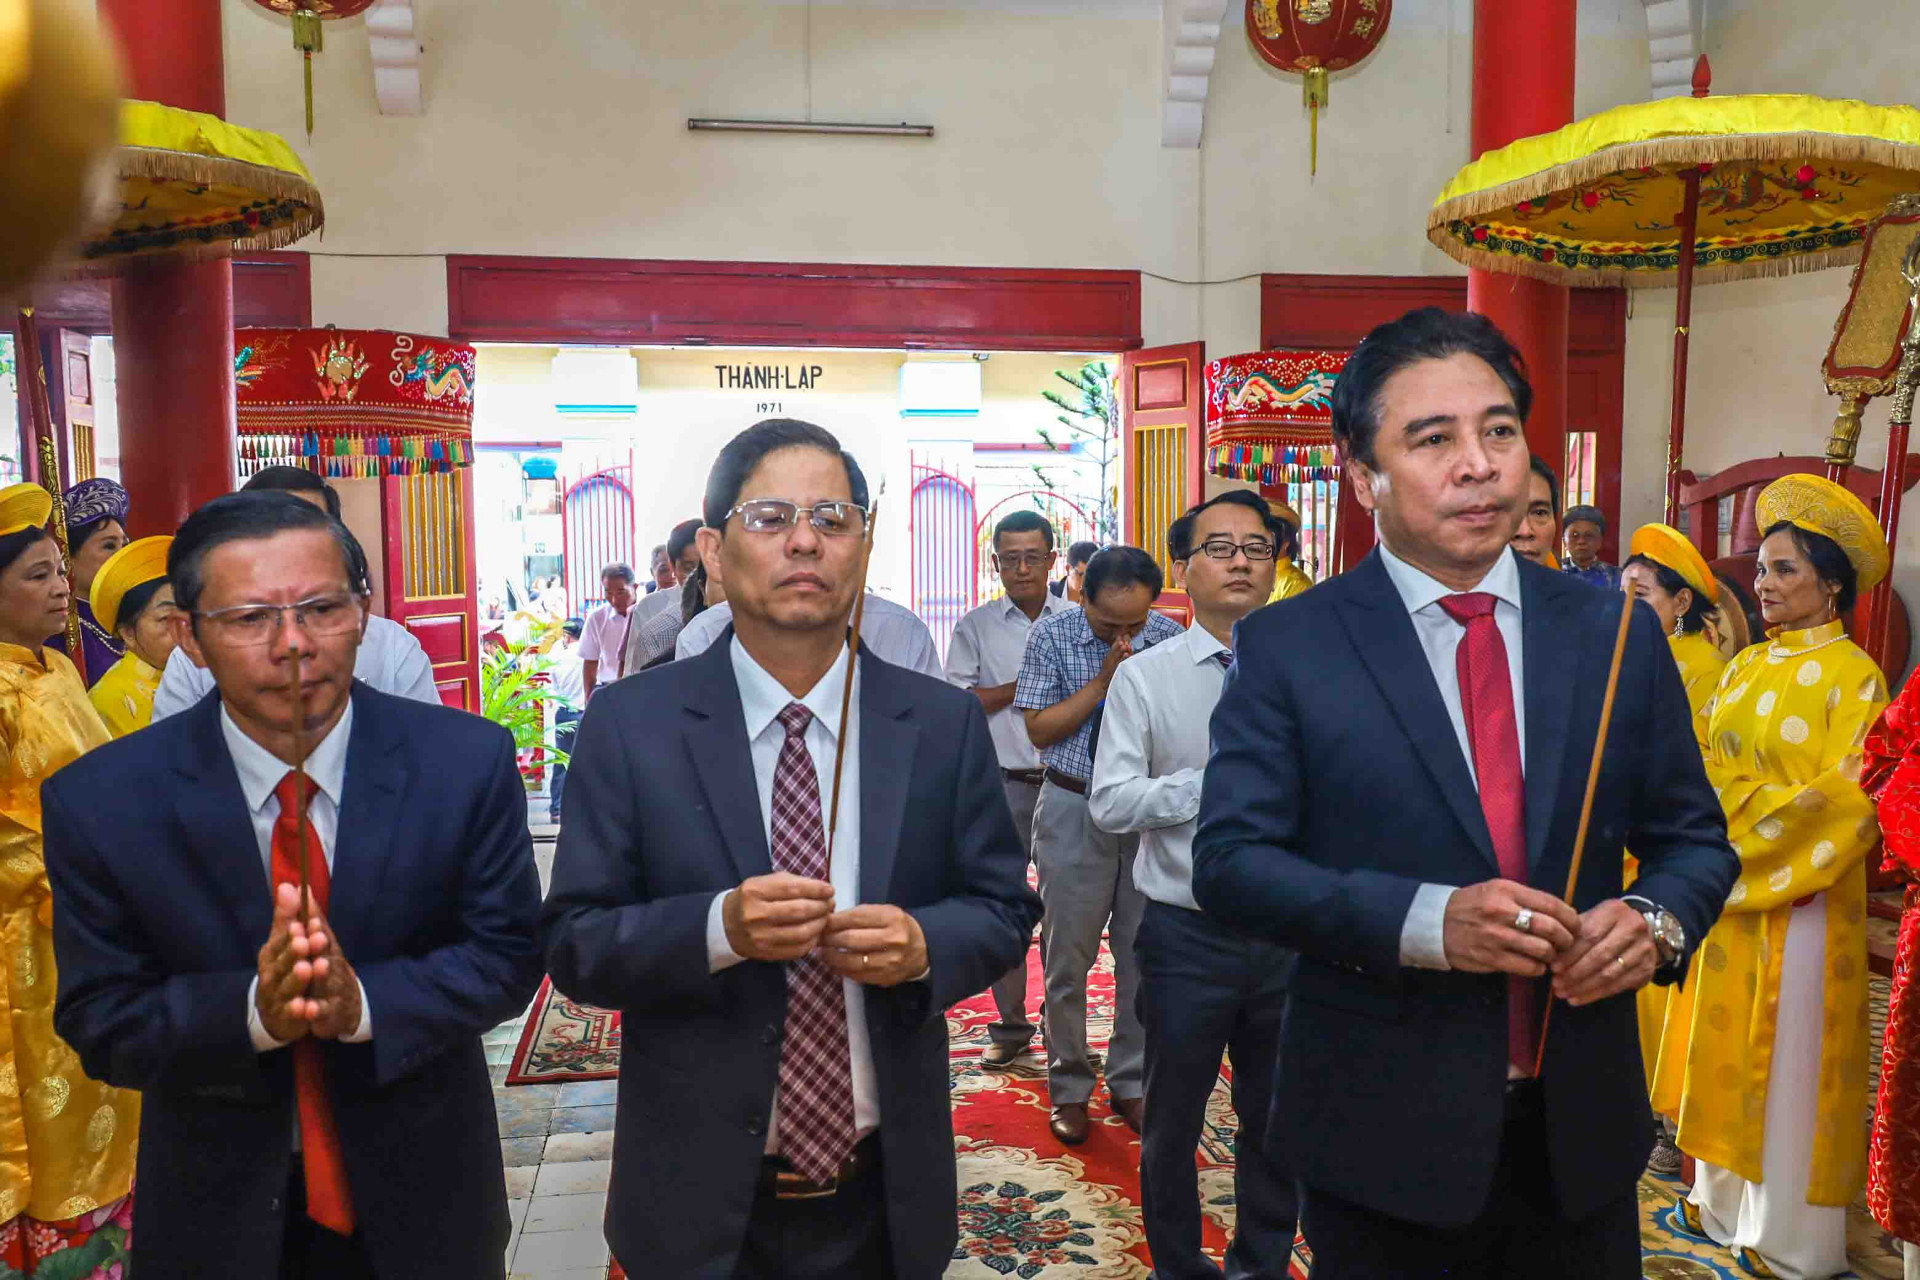 Khanh Hoa’s leadership offering incense in tribute to the Kings